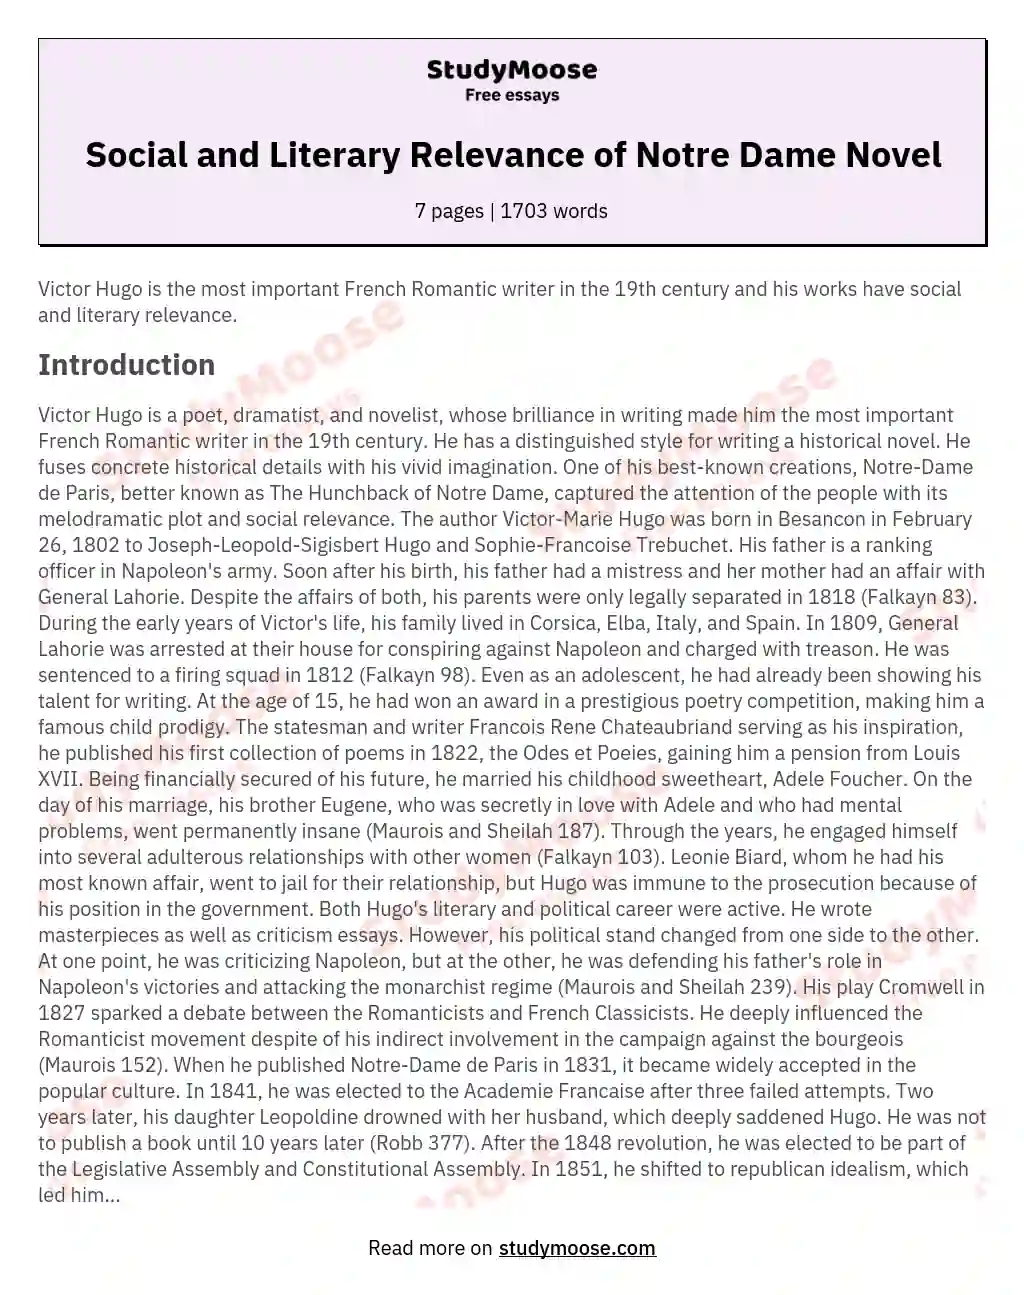 Social and Literary Relevance of Notre Dame Novel essay